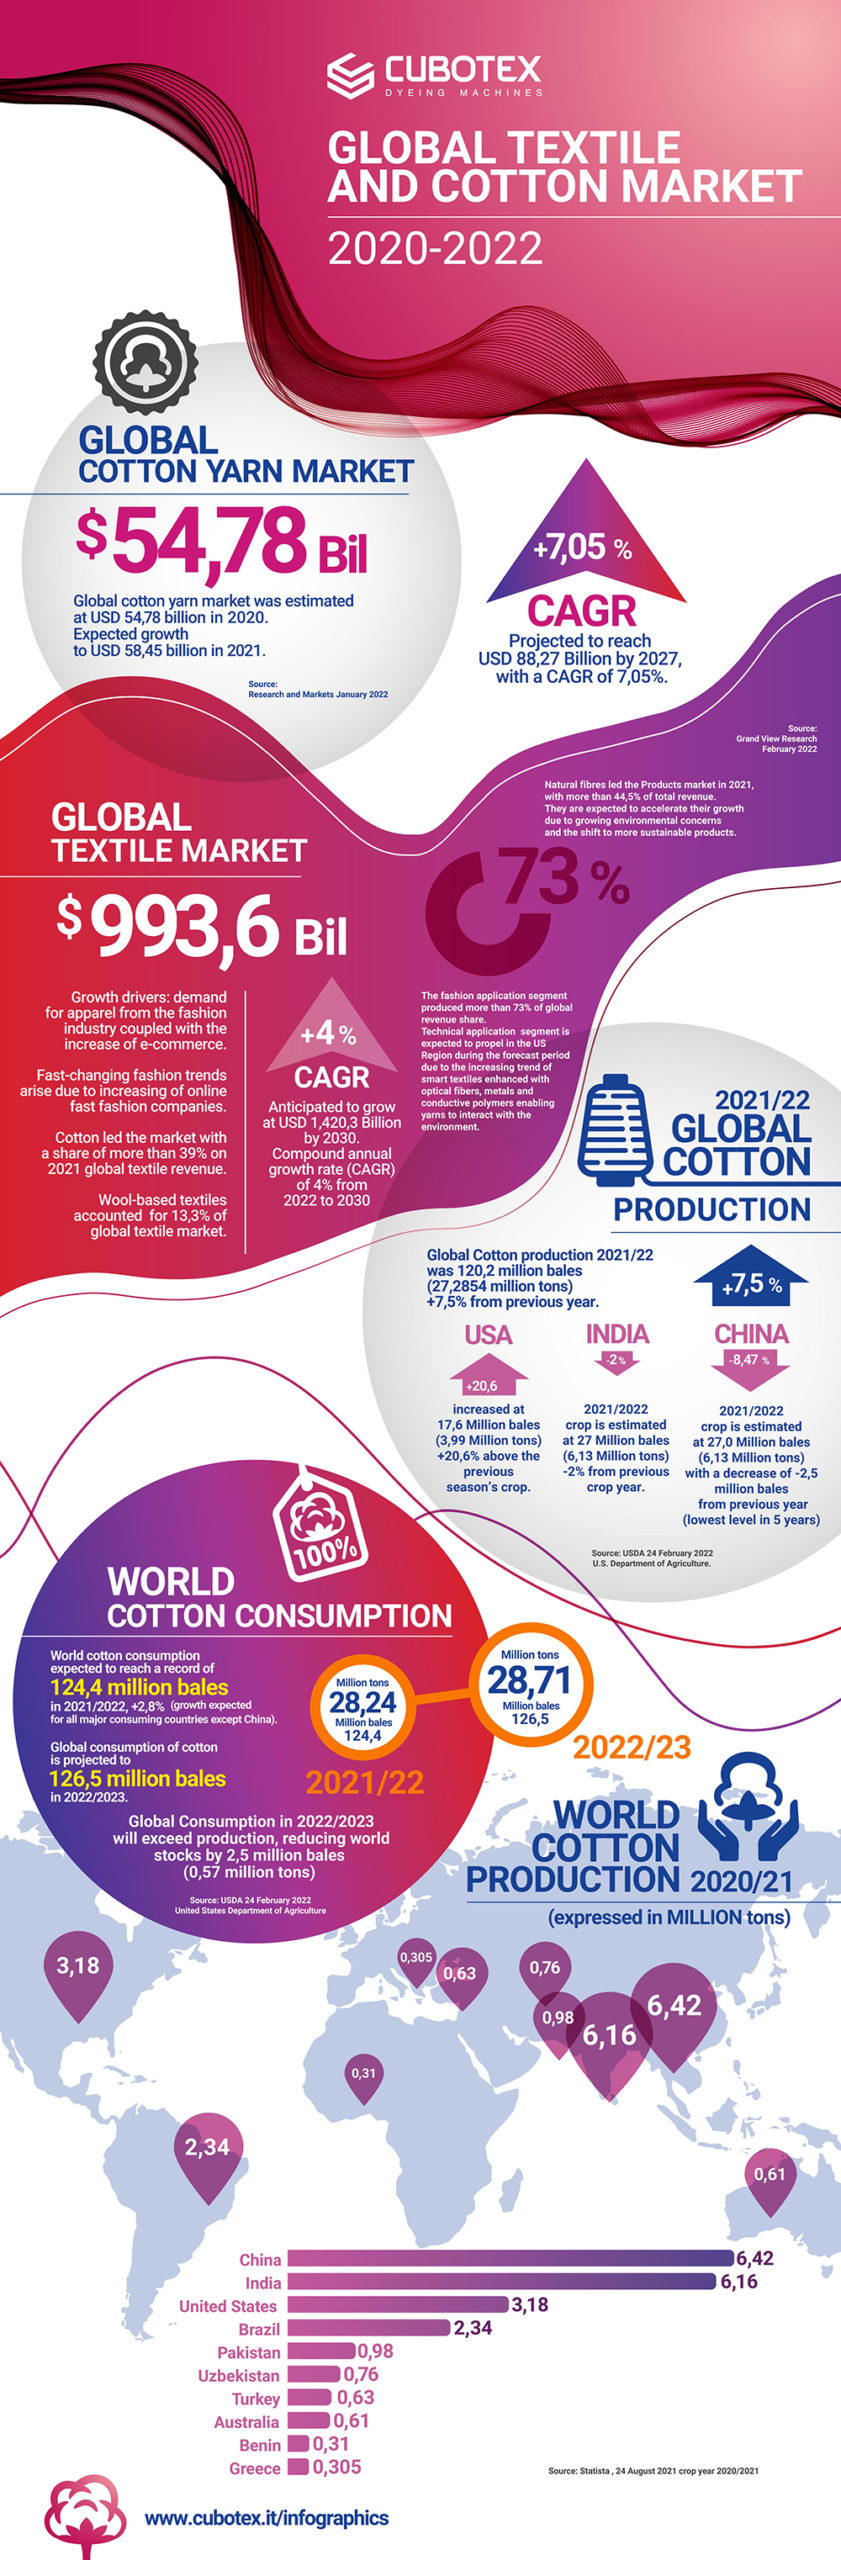 Cubotex - Global textile and cotton market 20-22 - Infographic (JPG)